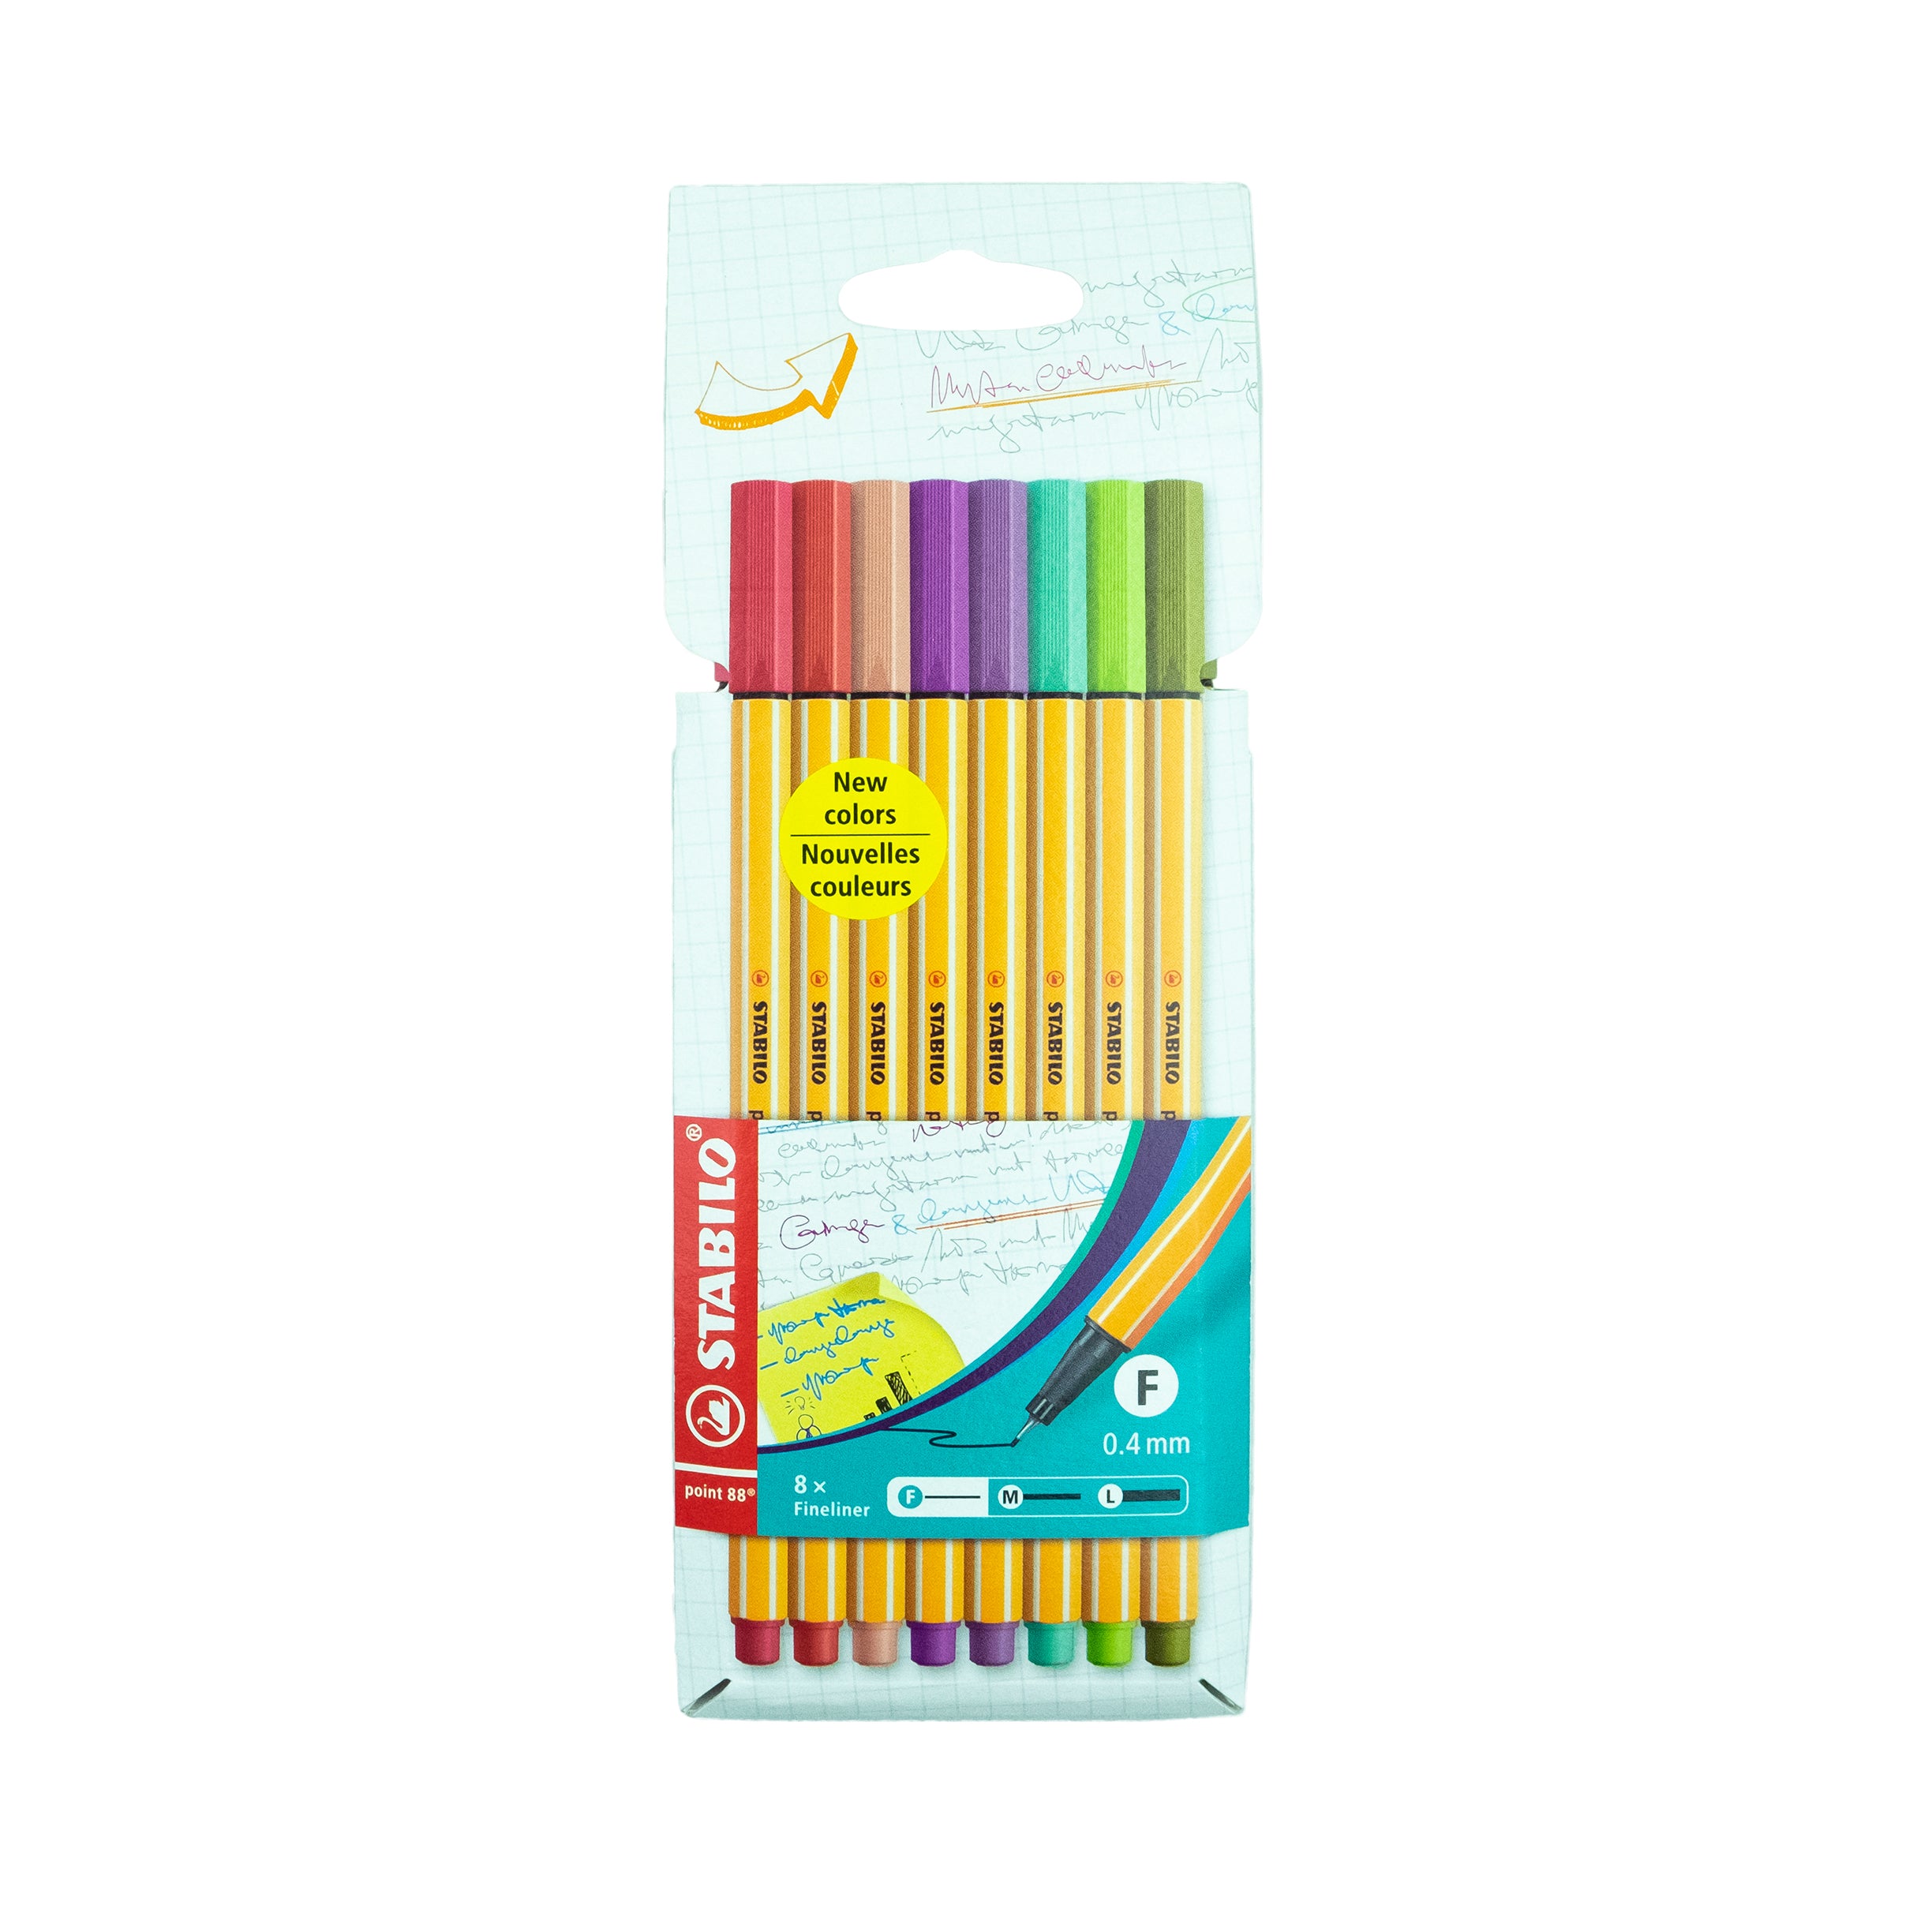 Stabilo Point 88 Fineliners, Muted Colors Set of 8